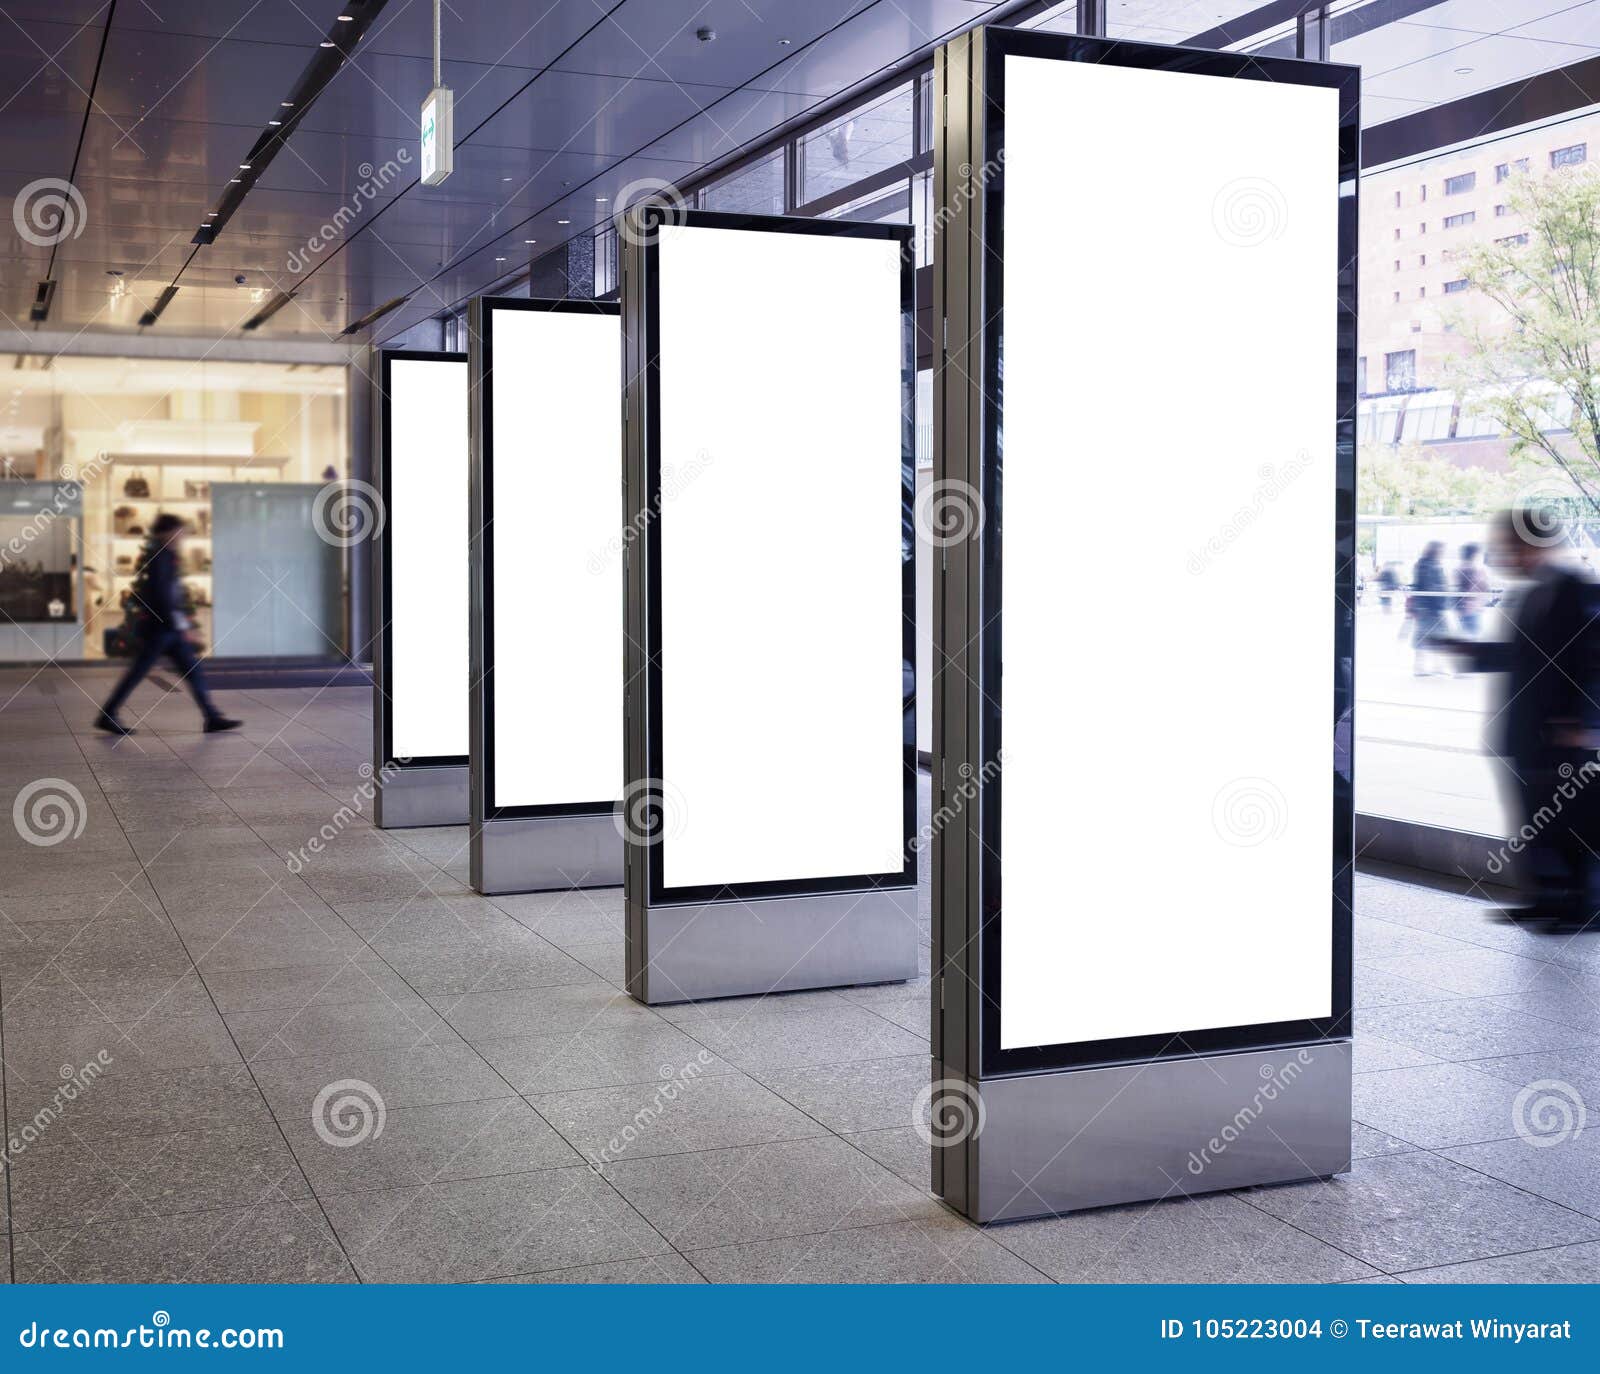 mock up blank banners display in public building with people